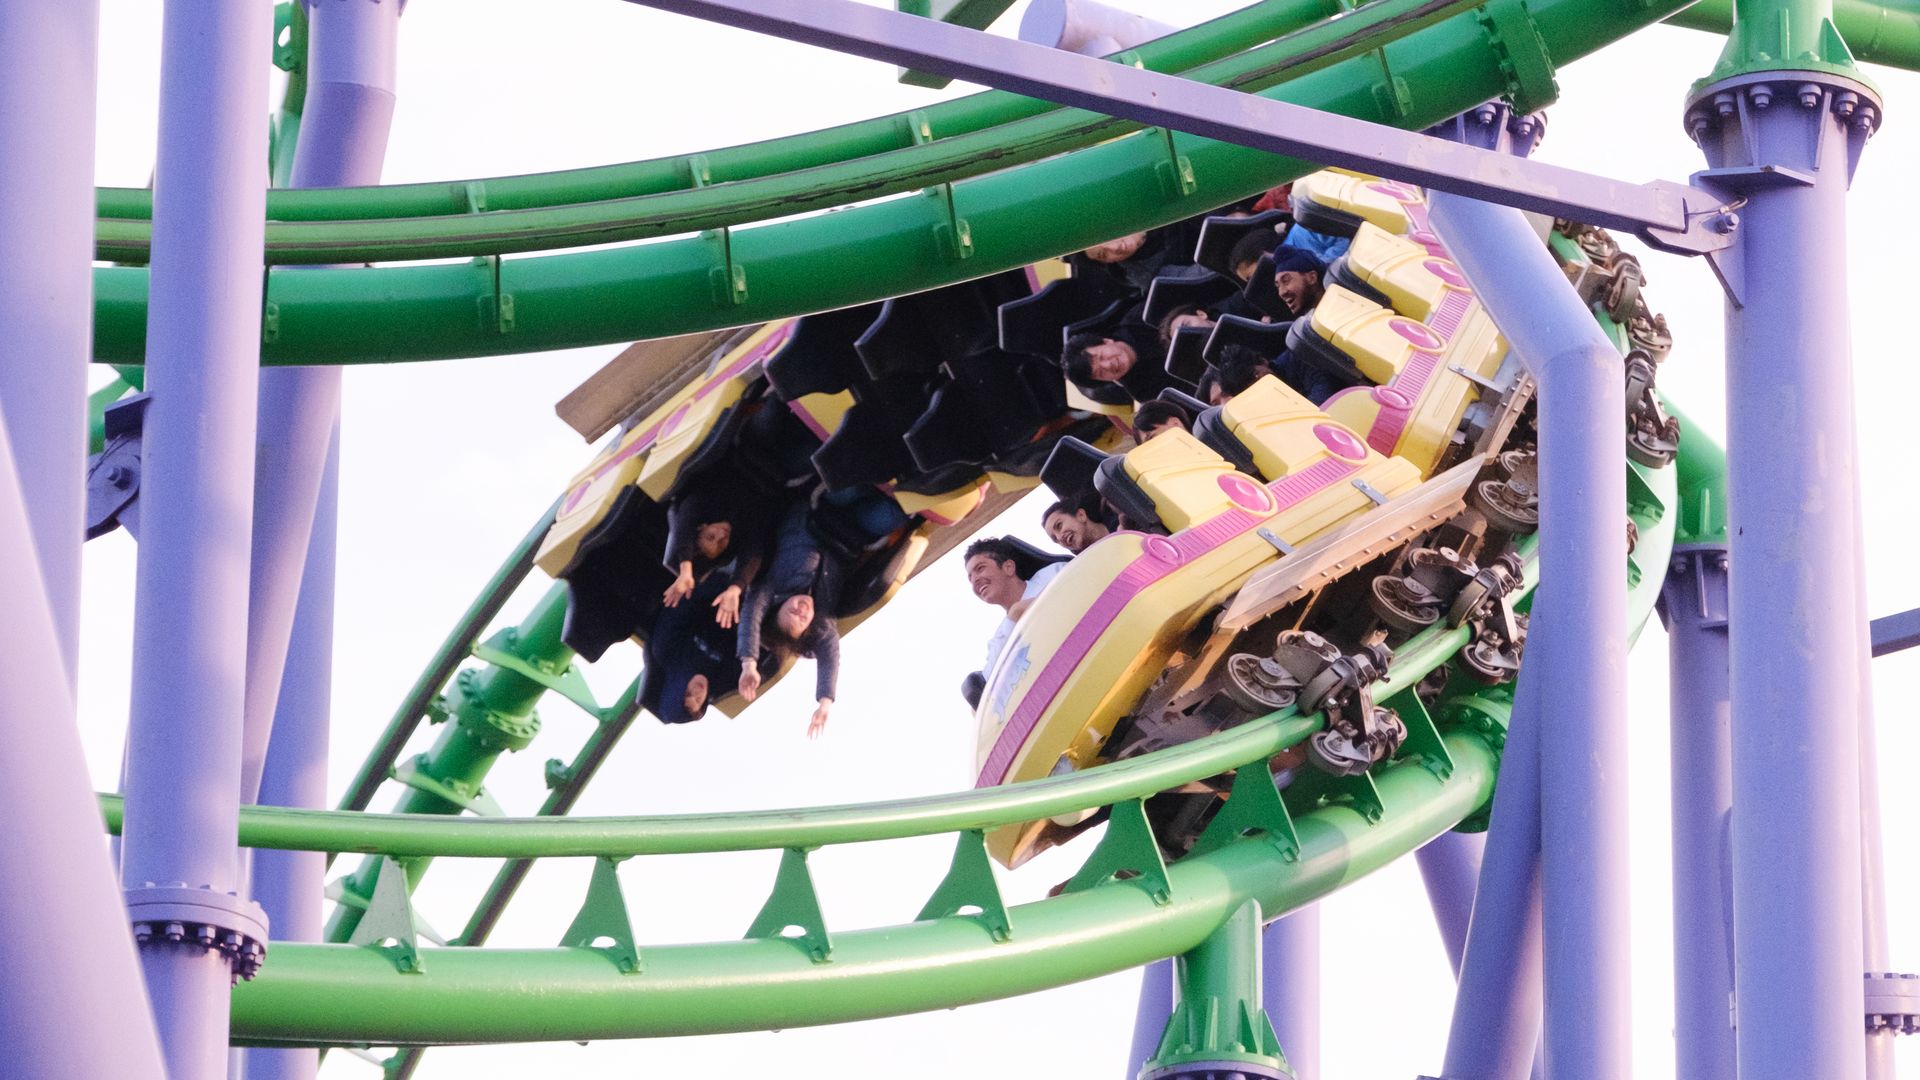 People riding a green and purple roller coaster